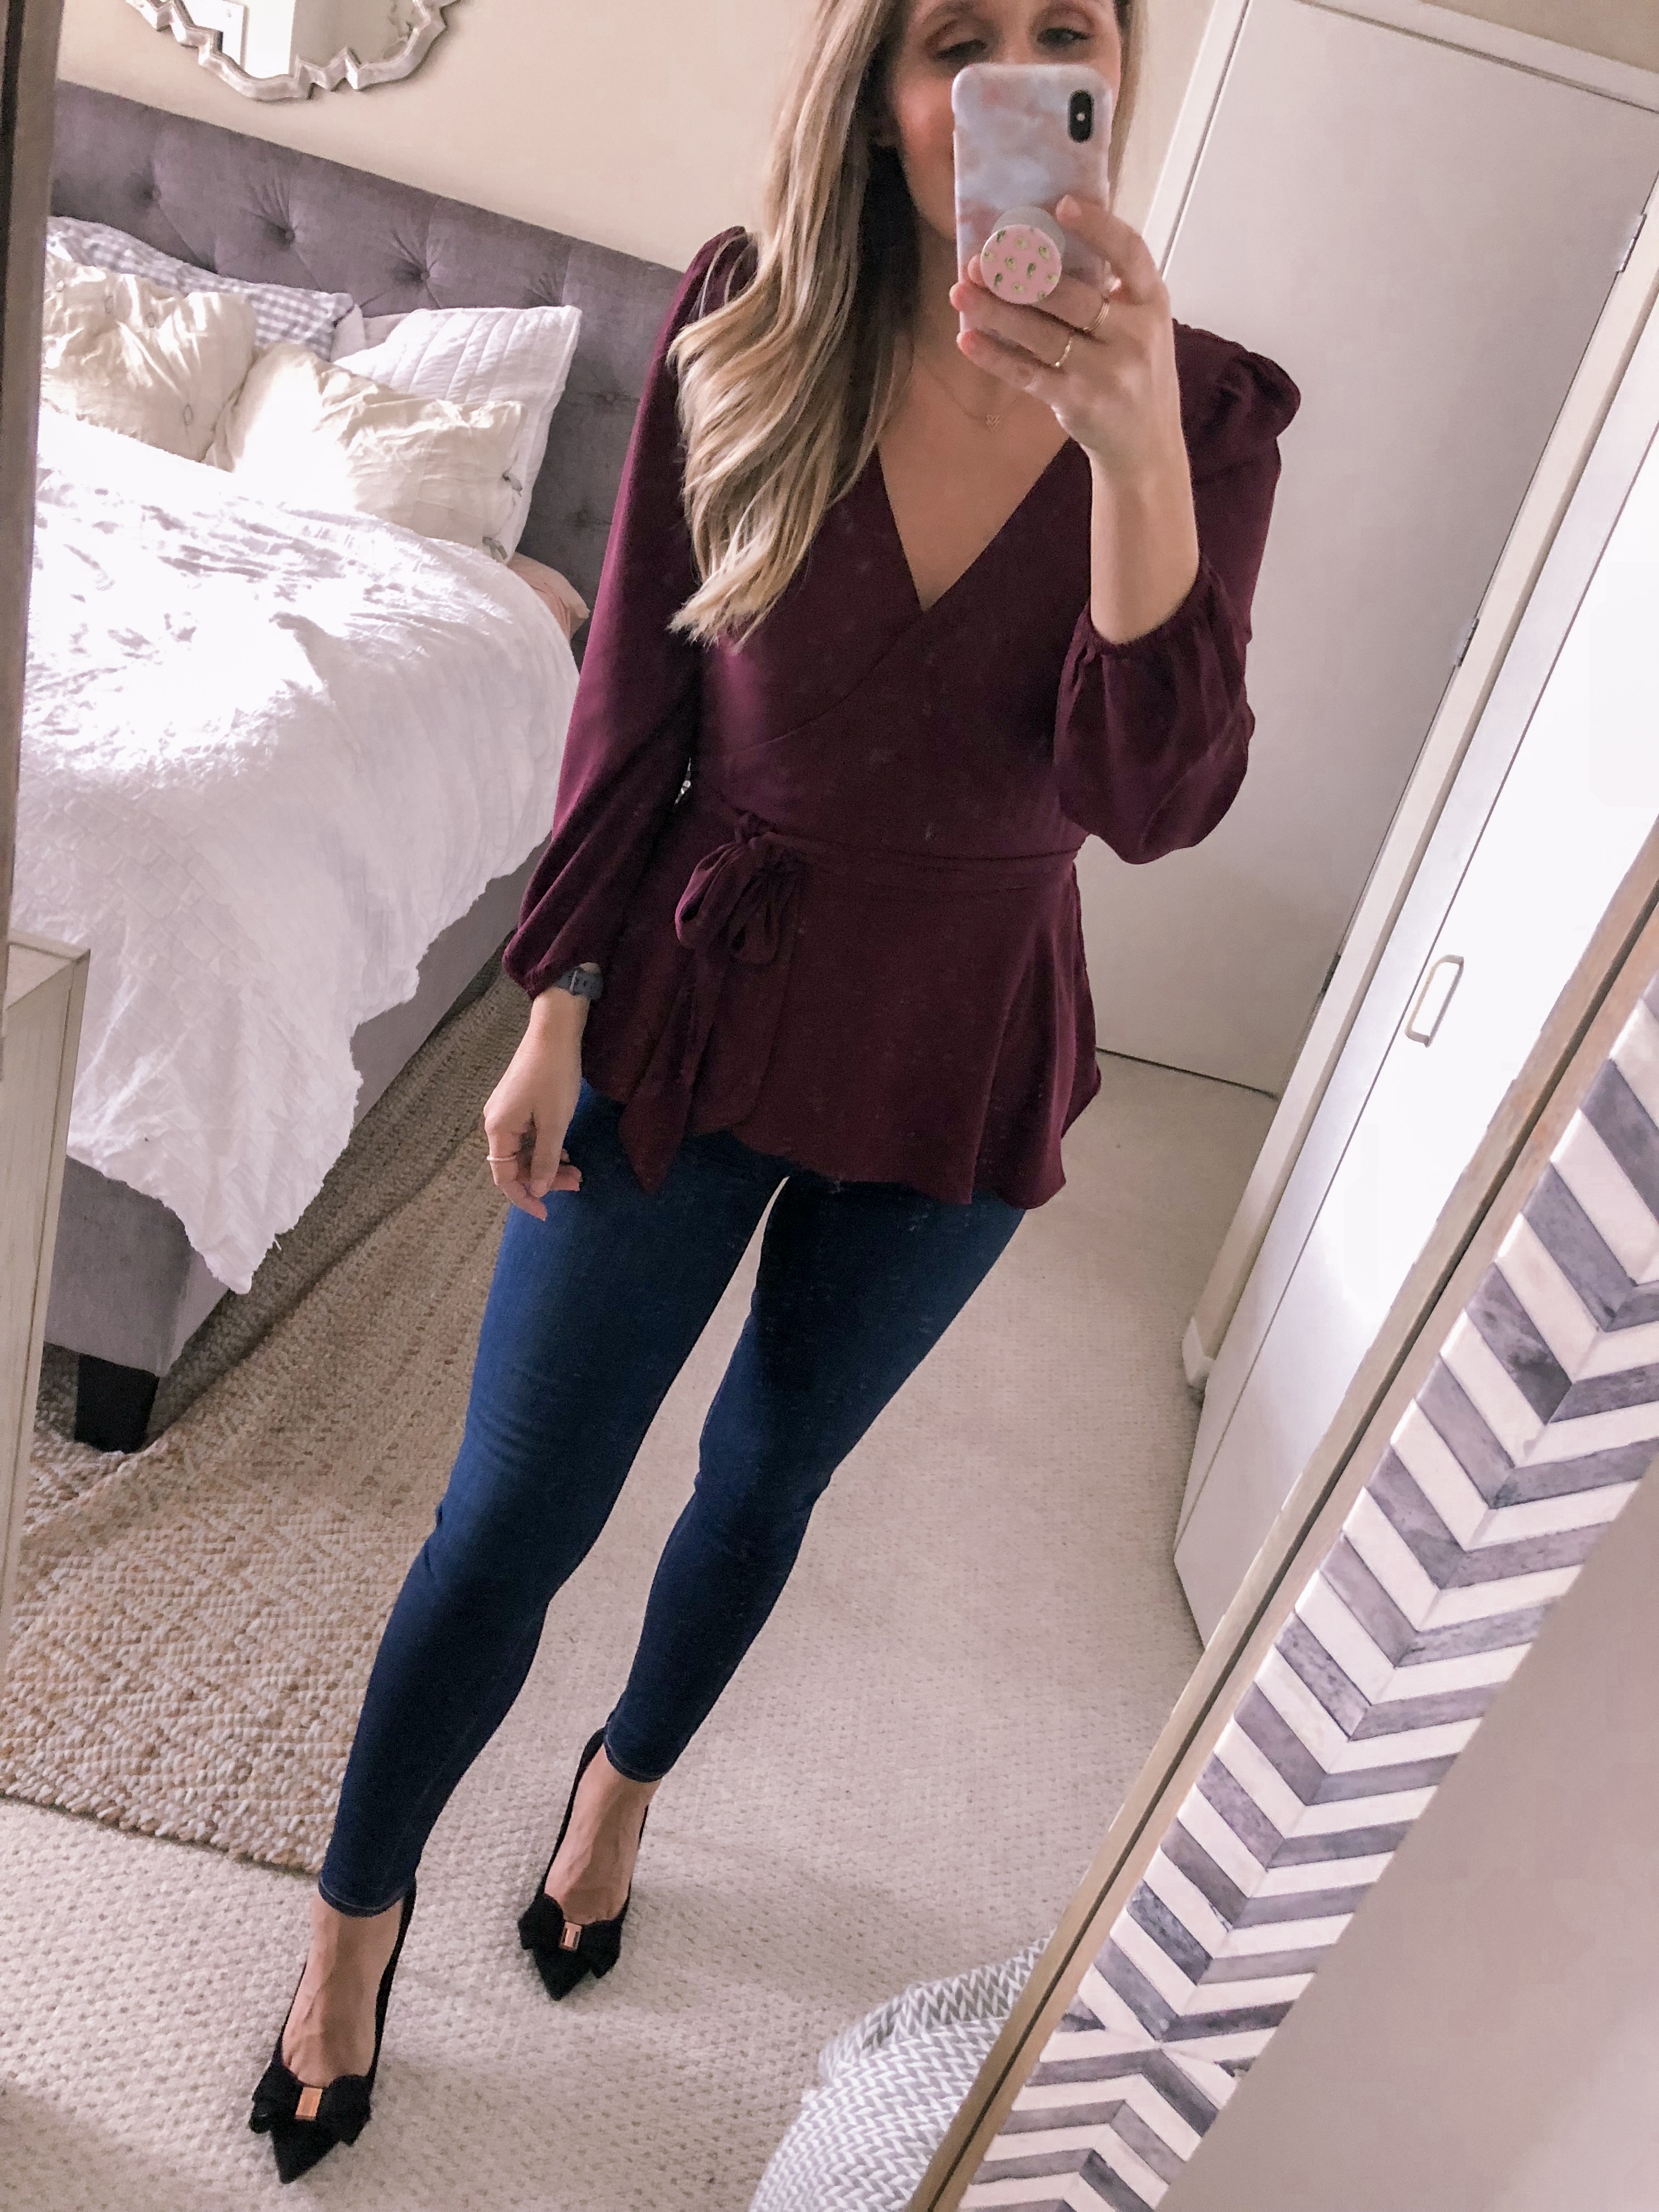 Chicago fashion blogger Visions of Vogue styles a LOFT burgundy wrap top for the office as a work outfit idea.